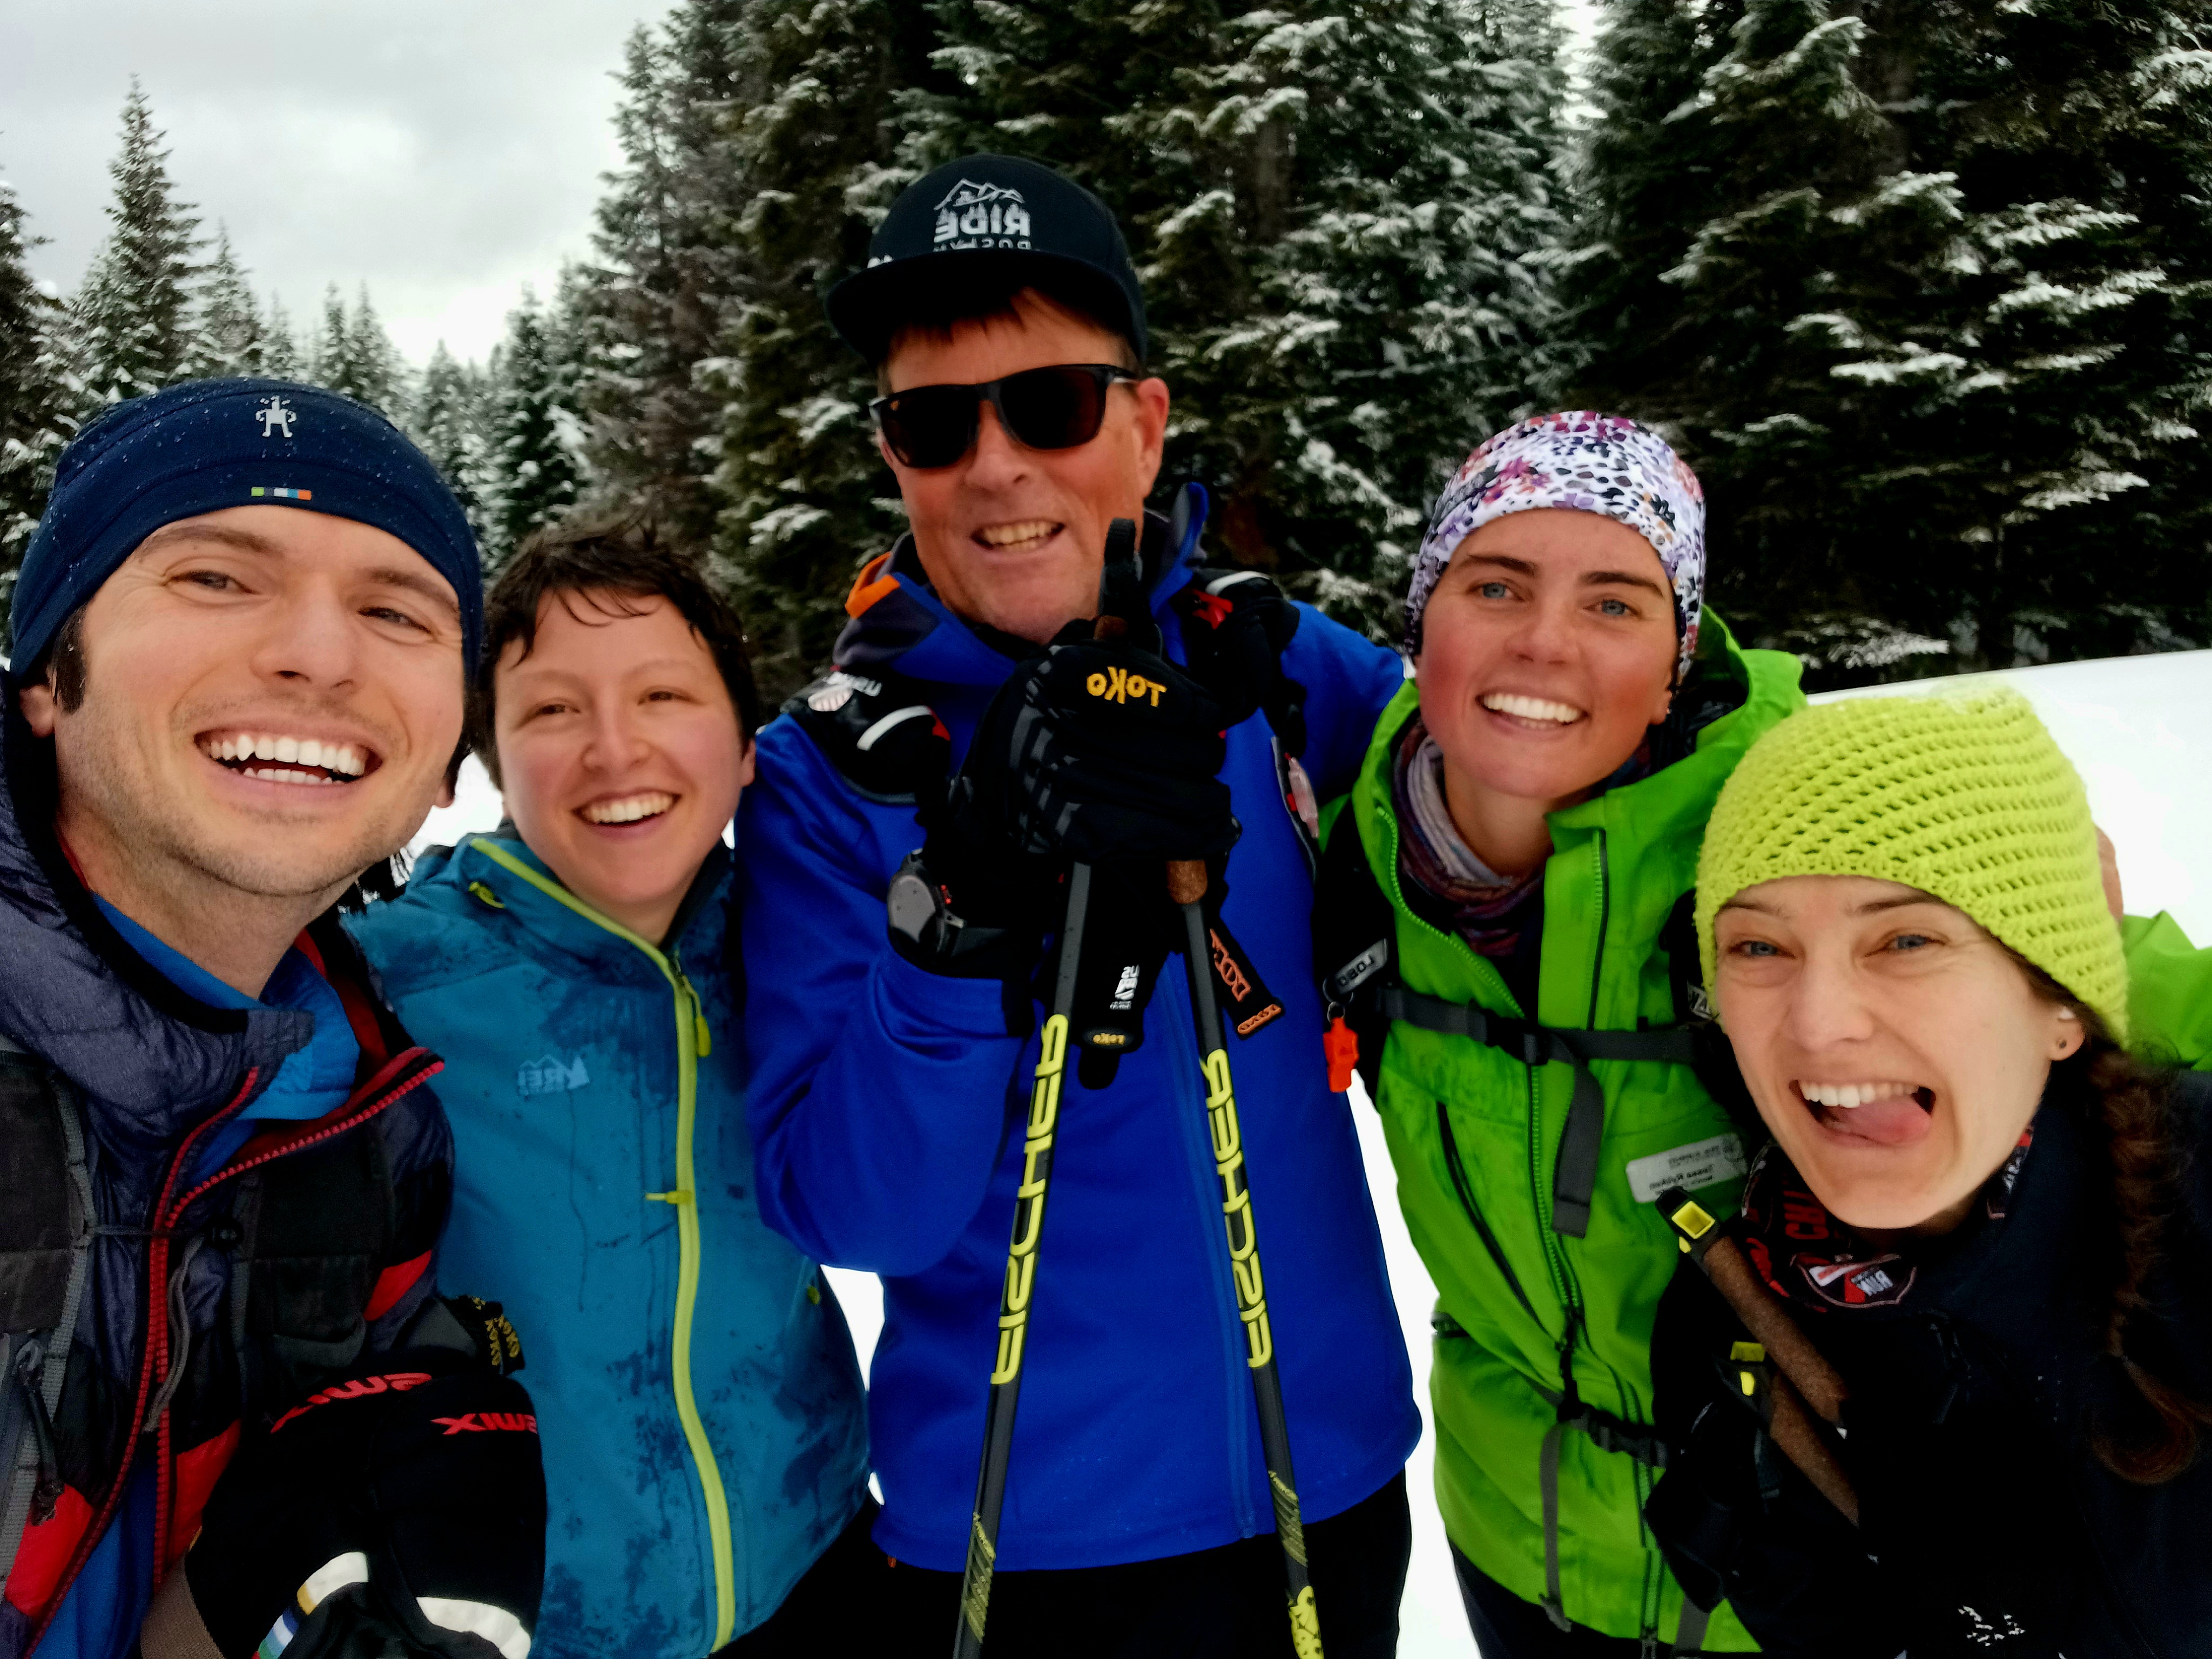 Smiling group of skiers